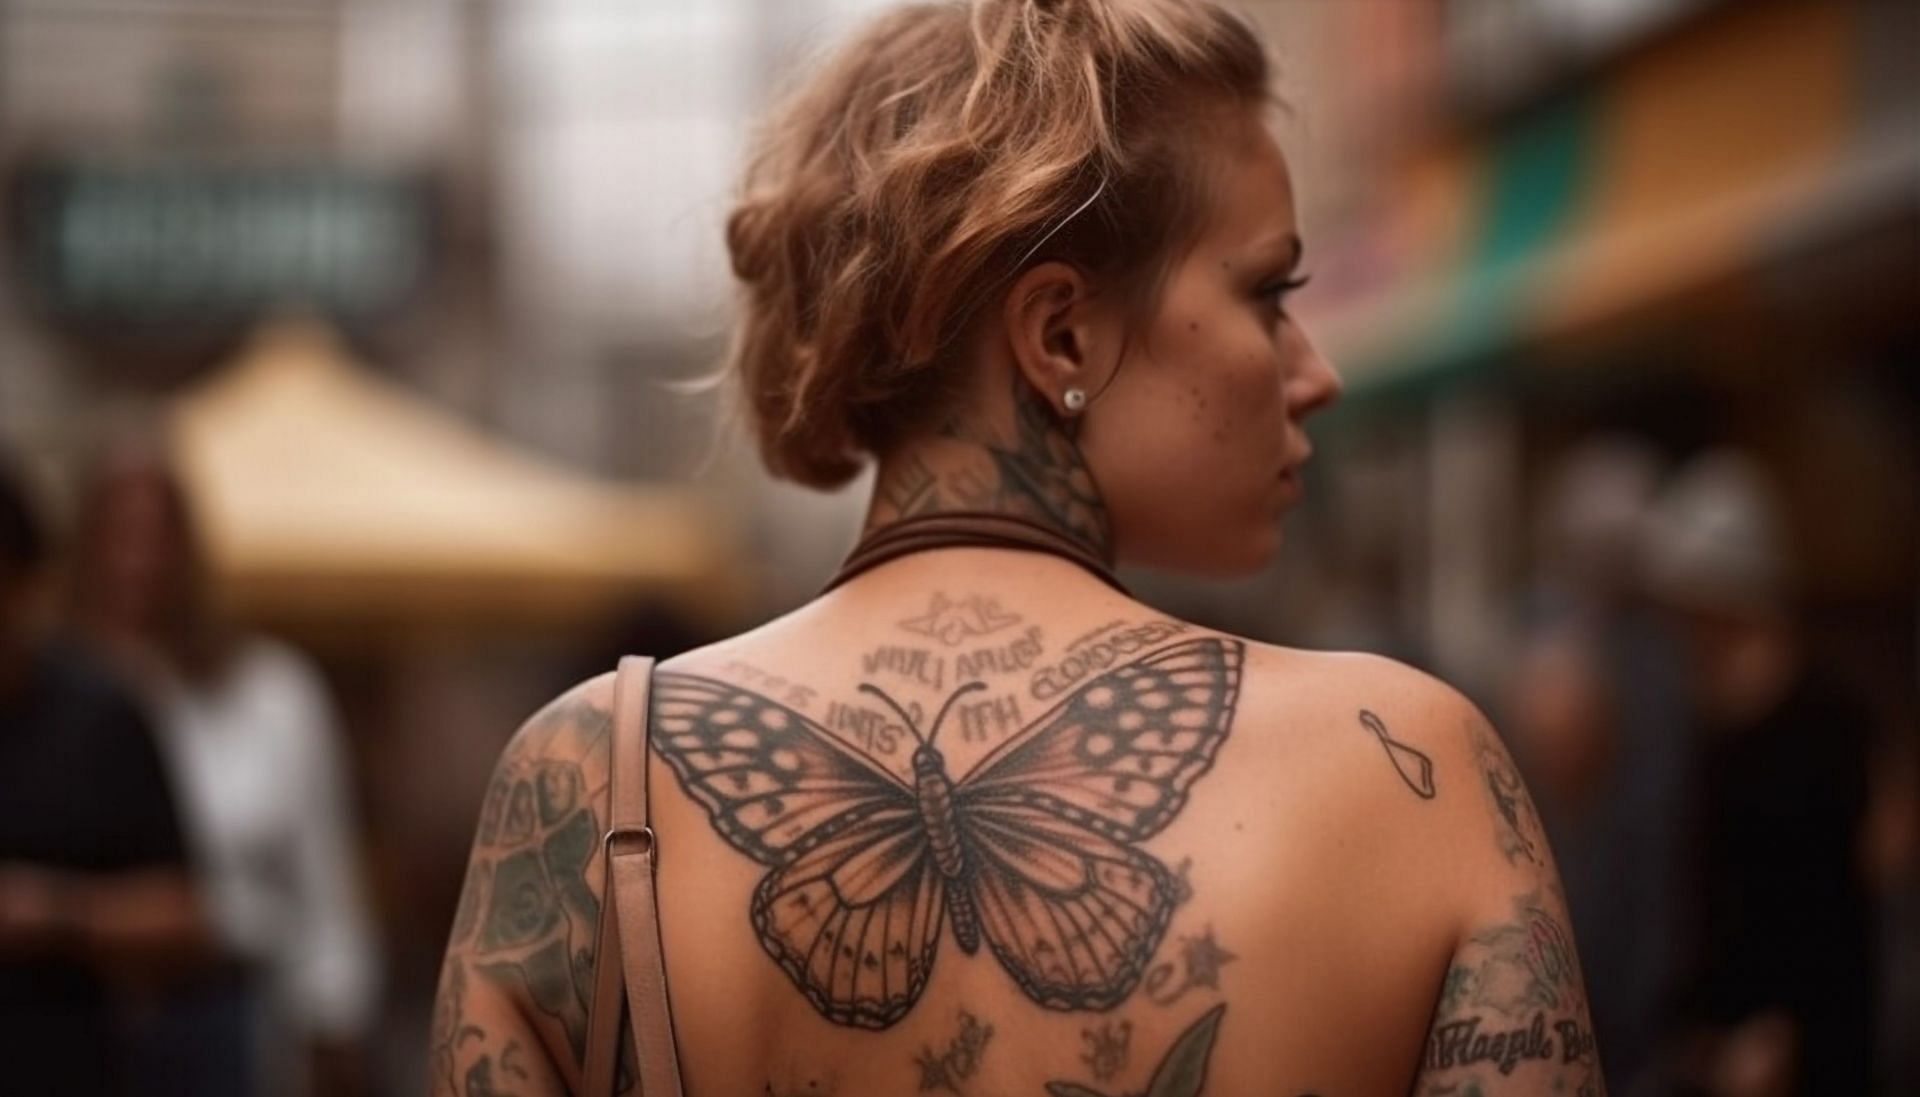 The butterfly tattoo is a representation of transformation and possibilities. (Image via Vecteezy/Gstudioimagen)